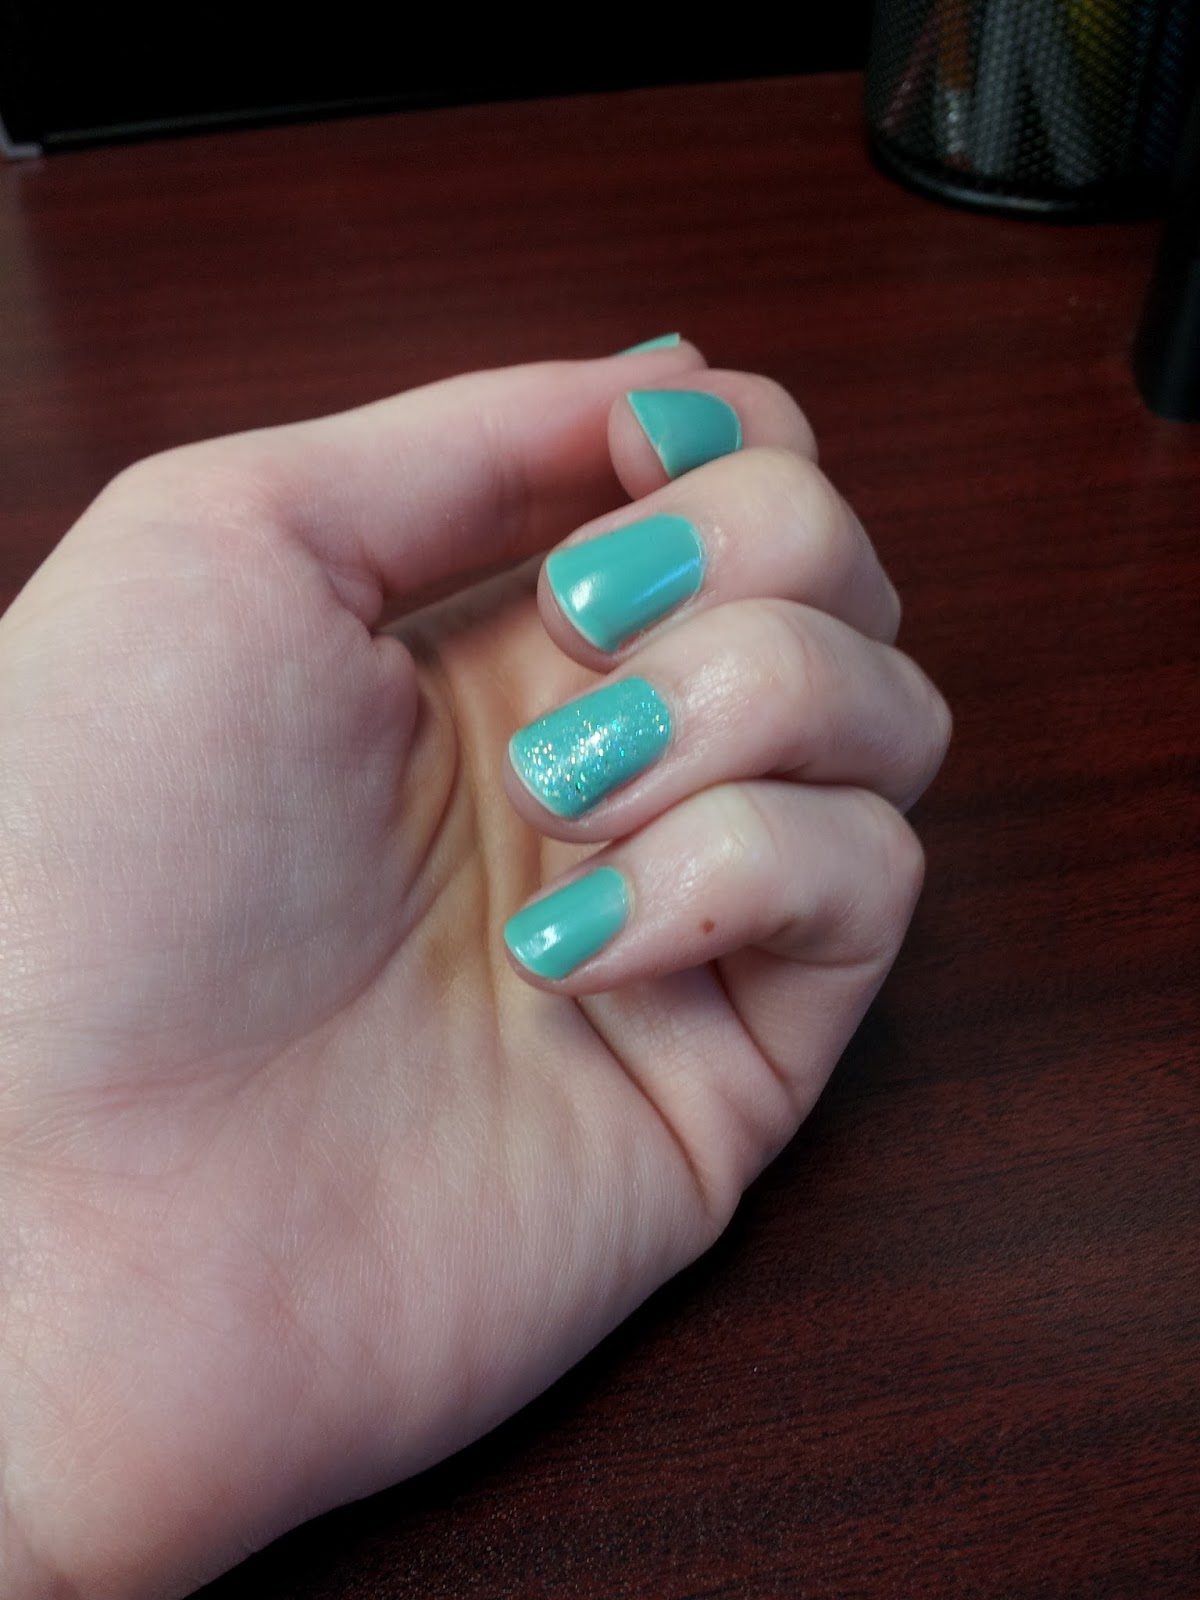 This is Essie's Turquoise and Caicos with a topcoat of Sally Hansen's Hard